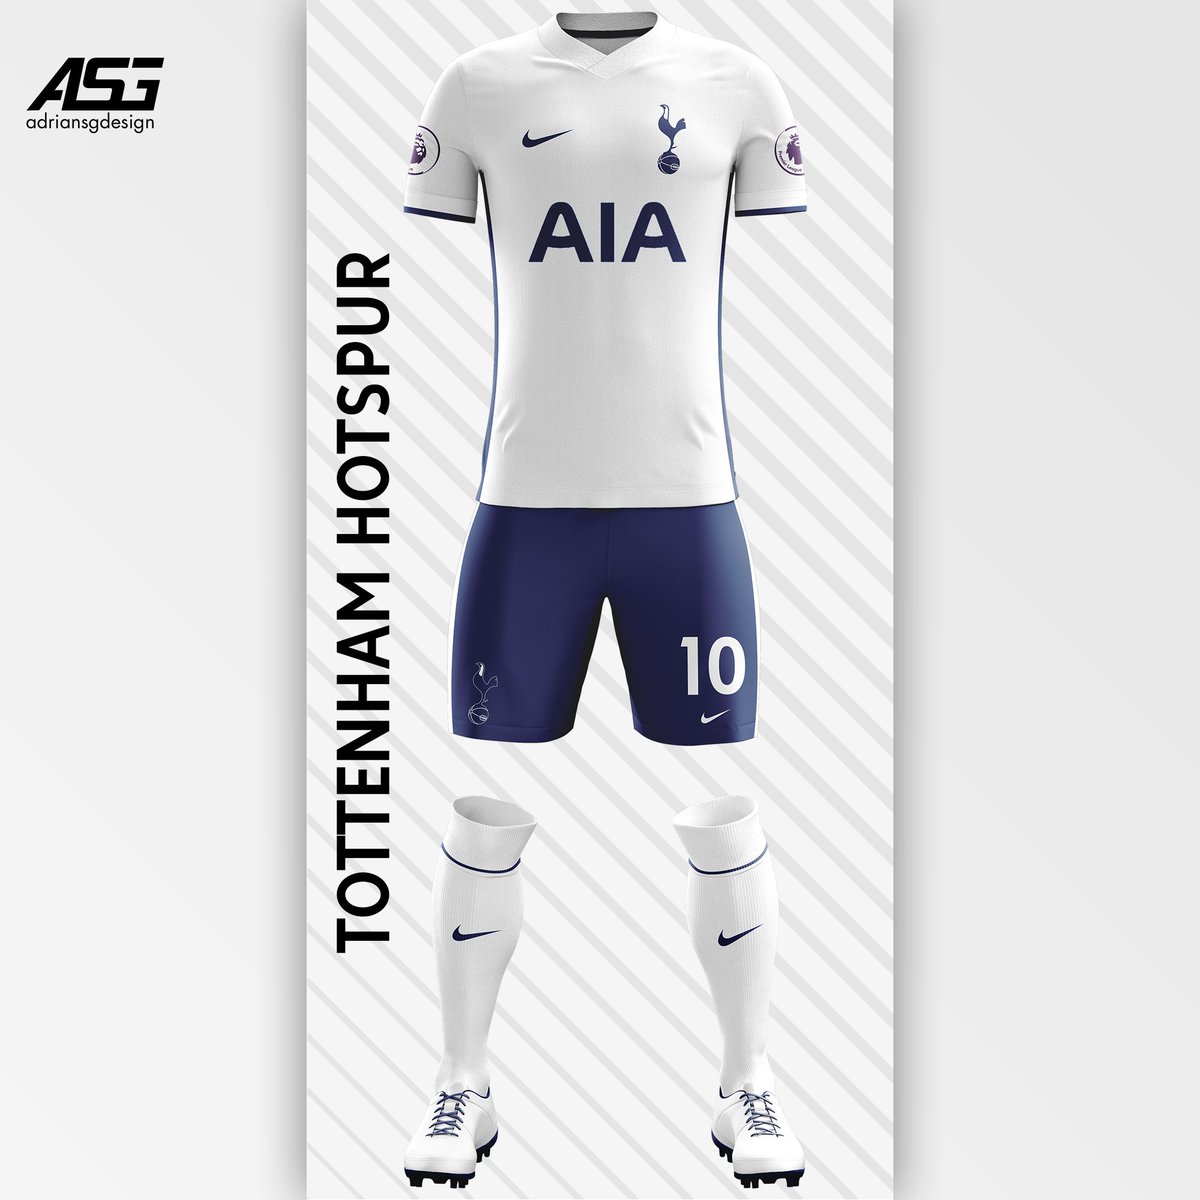 Tottenham  @SpursOfficial Plain white kit with some added blue. Made the AIA logo blue to blend in better.